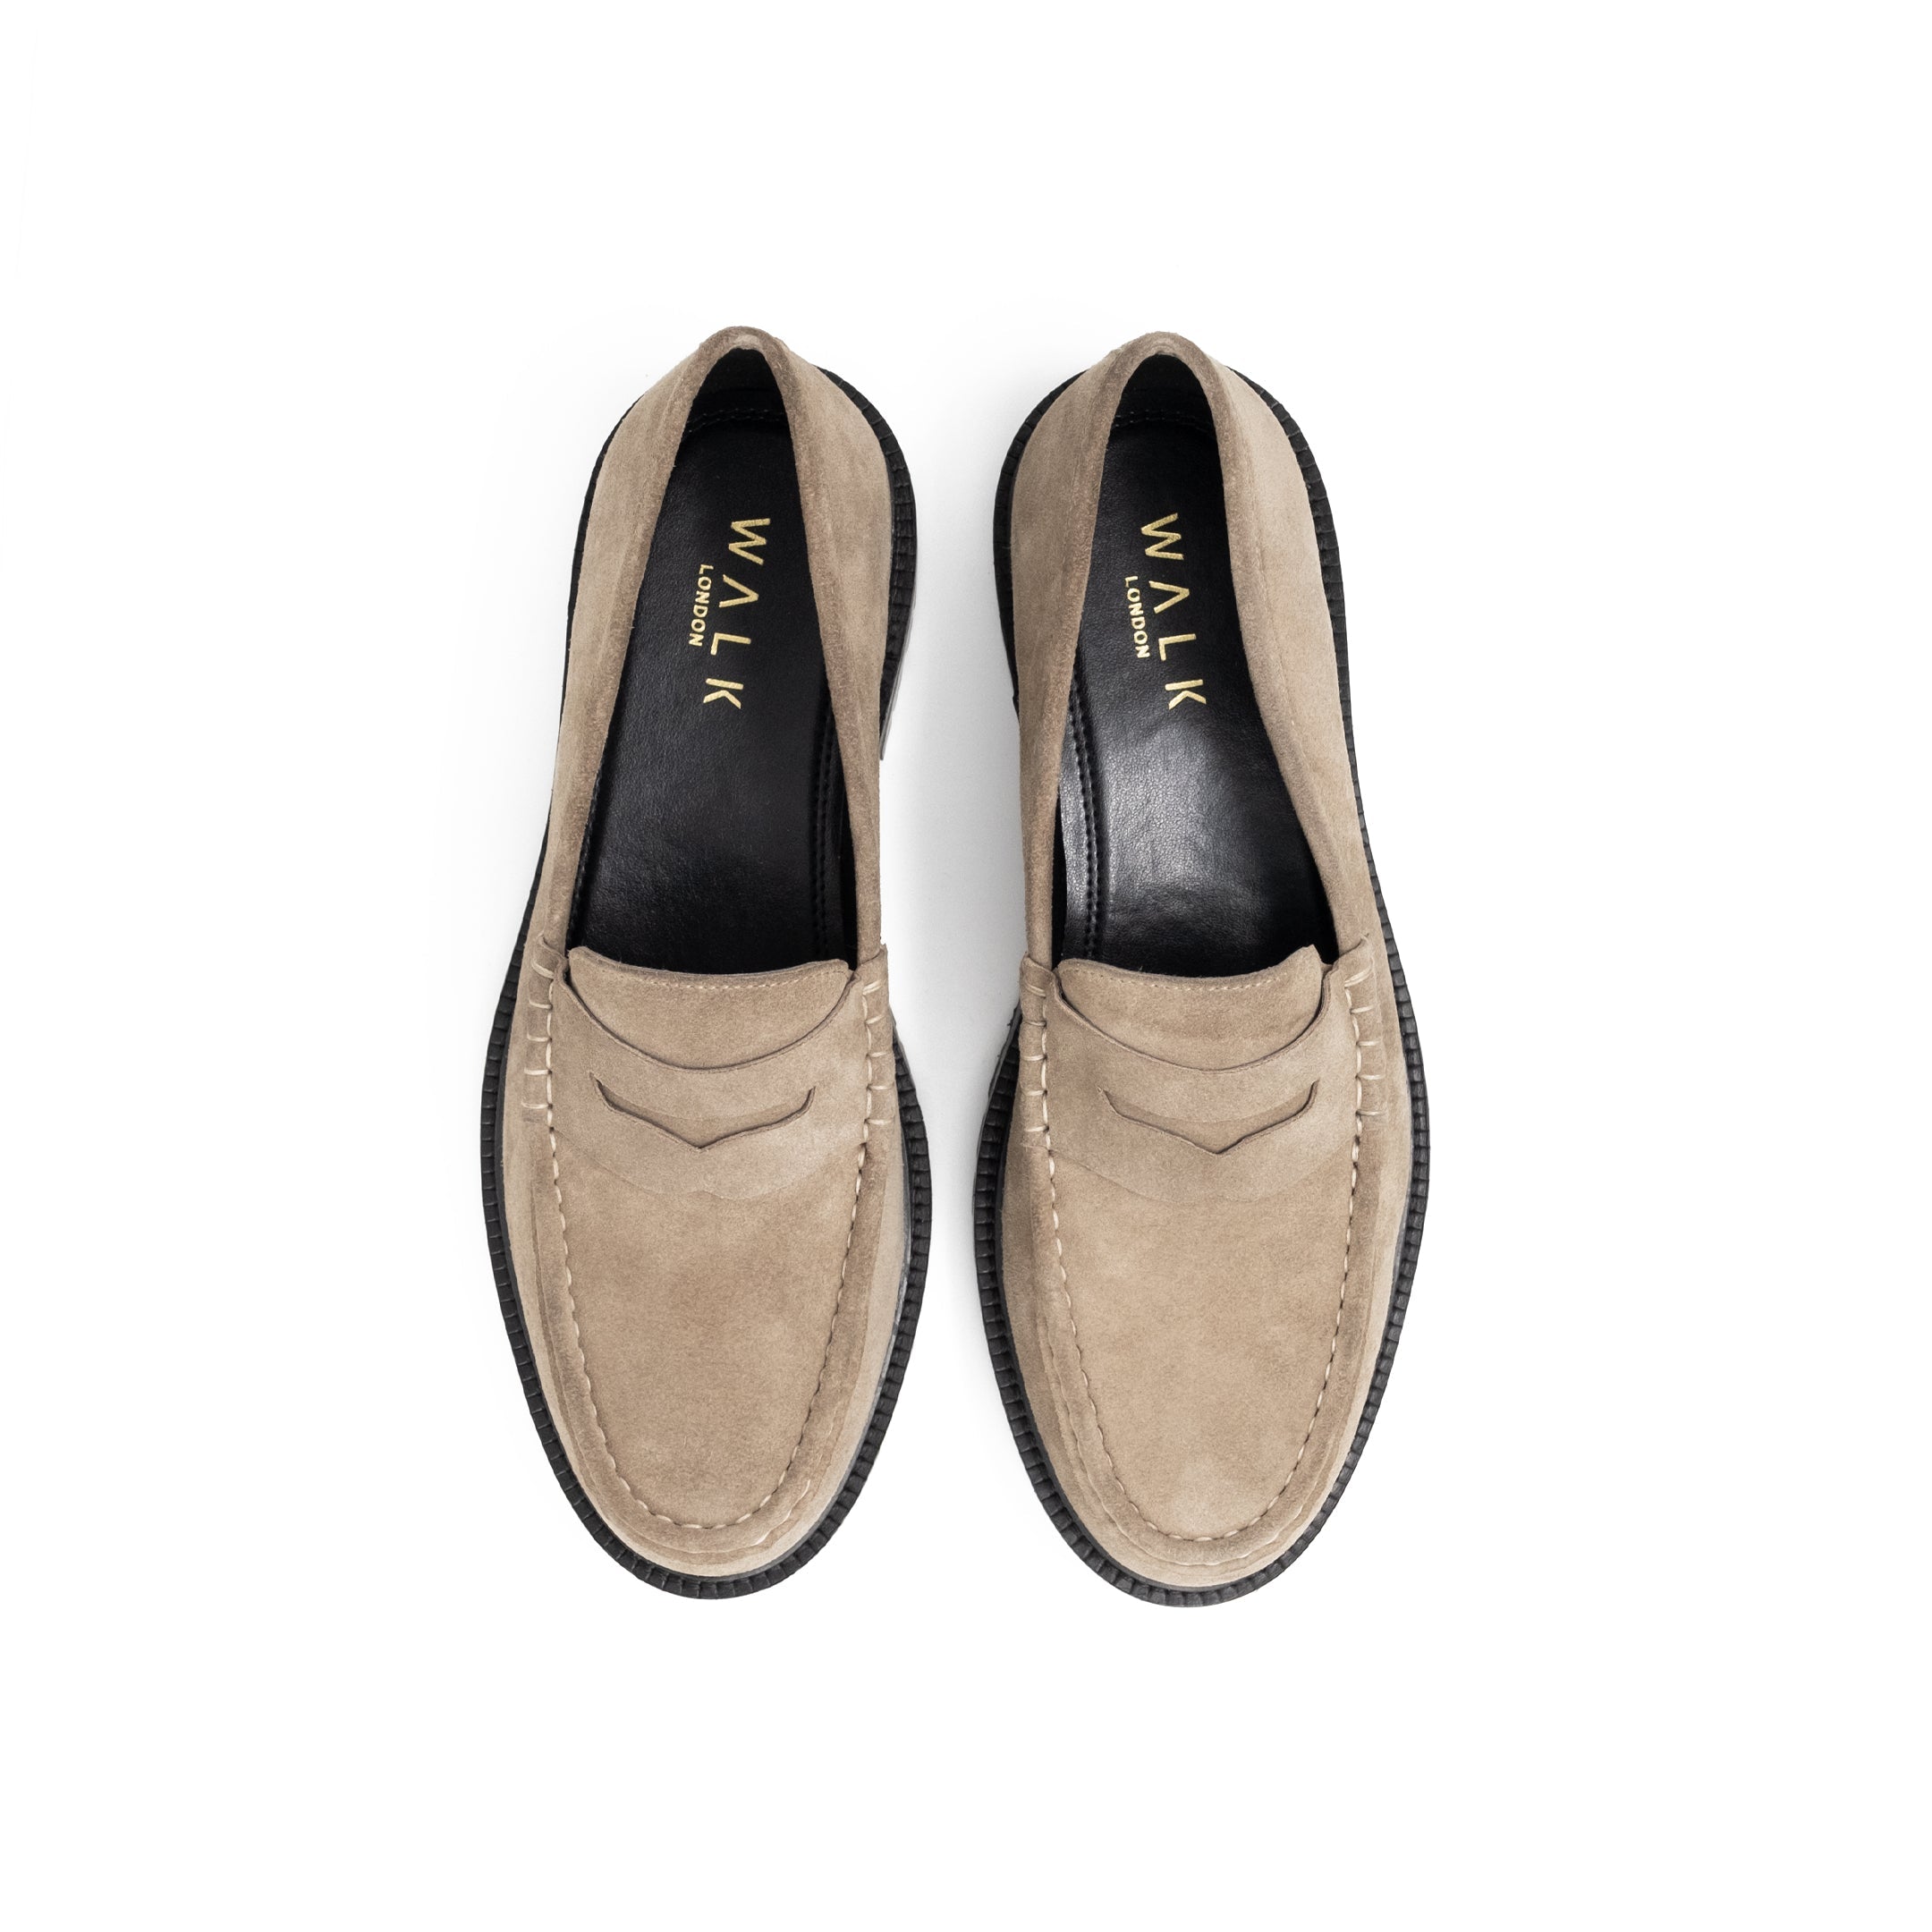 Birdseye View of the Walk London Campus Saddle Loafer